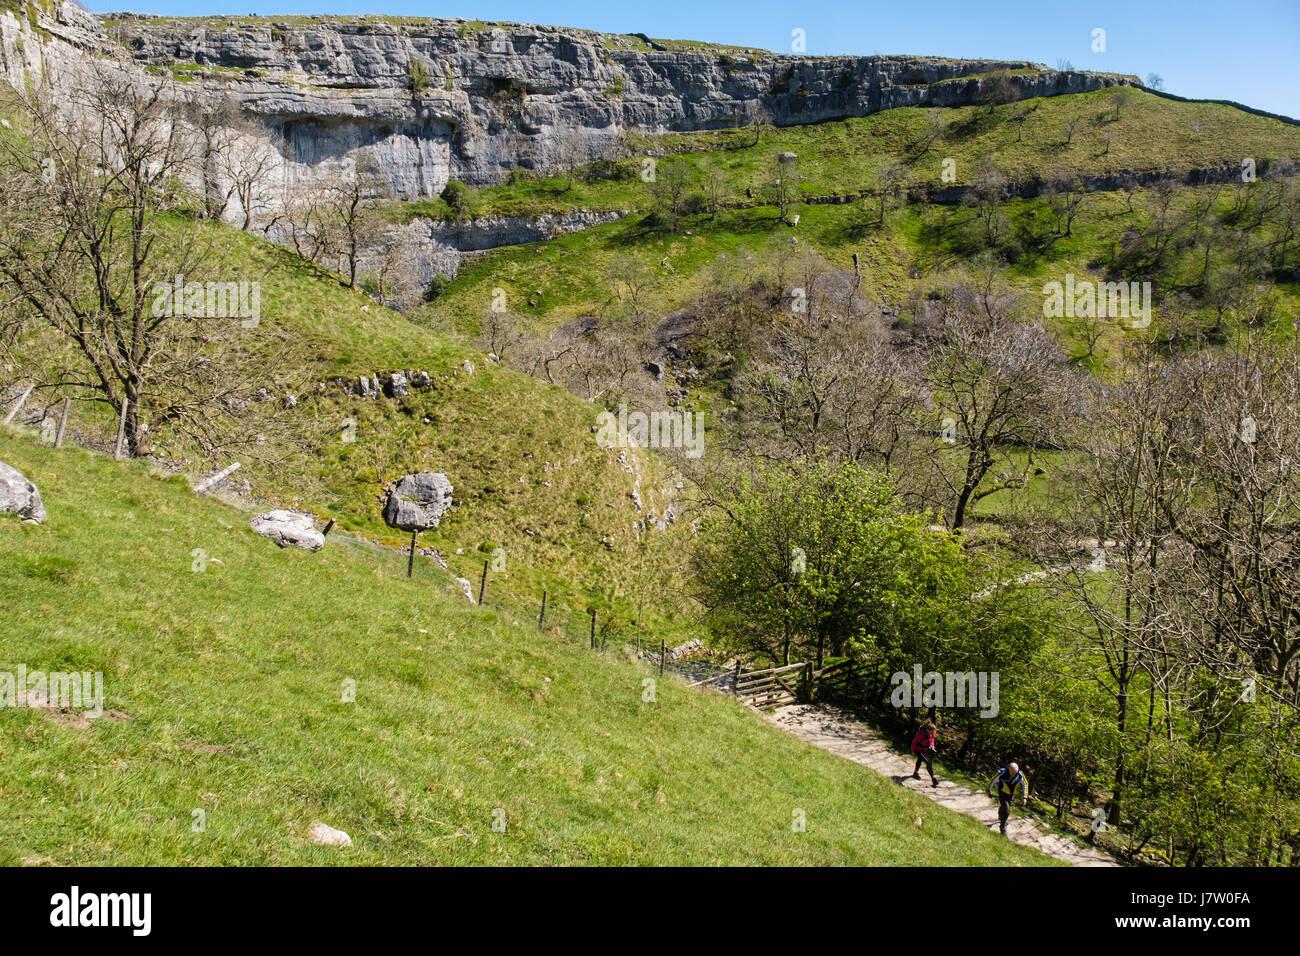 View of Malham Cove from Pennine Way path with people walking up. Malham, Malhamdale, Yorkshire Dales National Park, North Yorkshire, England, UK Stock Photo